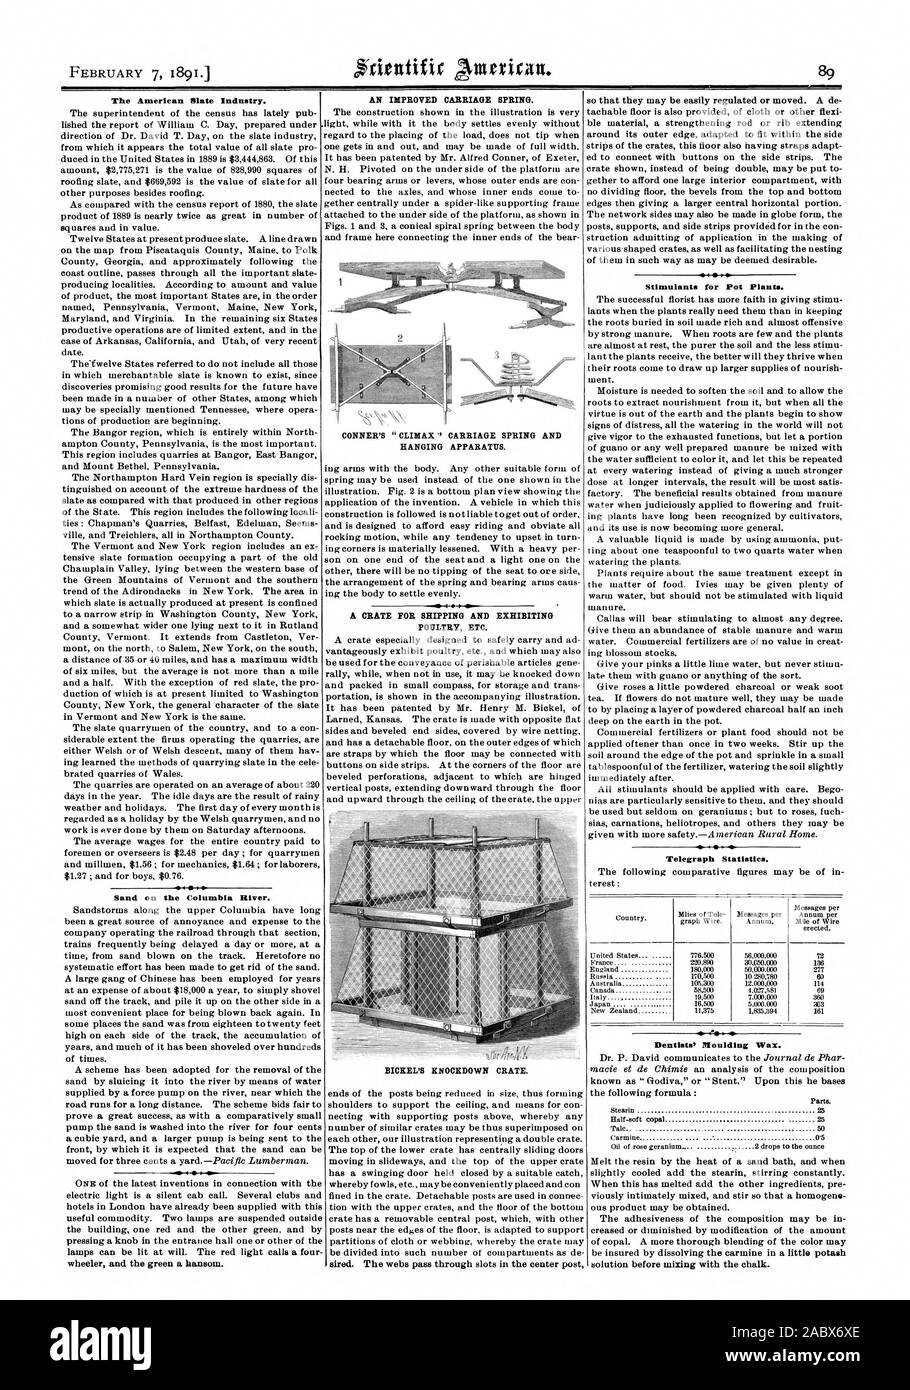 The American Slate Industry. Sand on the Columbia Hirer. AN IMPROVED CARRIAGE SPRING. POULTRY ETC. BICKEL'S KNOCKDOWN CRATE. so that they may be easily regulated or moved. A de tachable floor is also provided of cloth or other flexi ble material a strengthening rod or rib extending Stimulants for Pot Plants. Telegraph Statistics. -ore. Dentists' Moulding Wax. Parts. solution before mixing with the chalk. ‘   CONNER'S 'CLIMAX' CARRIAGE SPRING AND HANGING APPARATUS., scientific american, 1891-02-07 Stock Photo